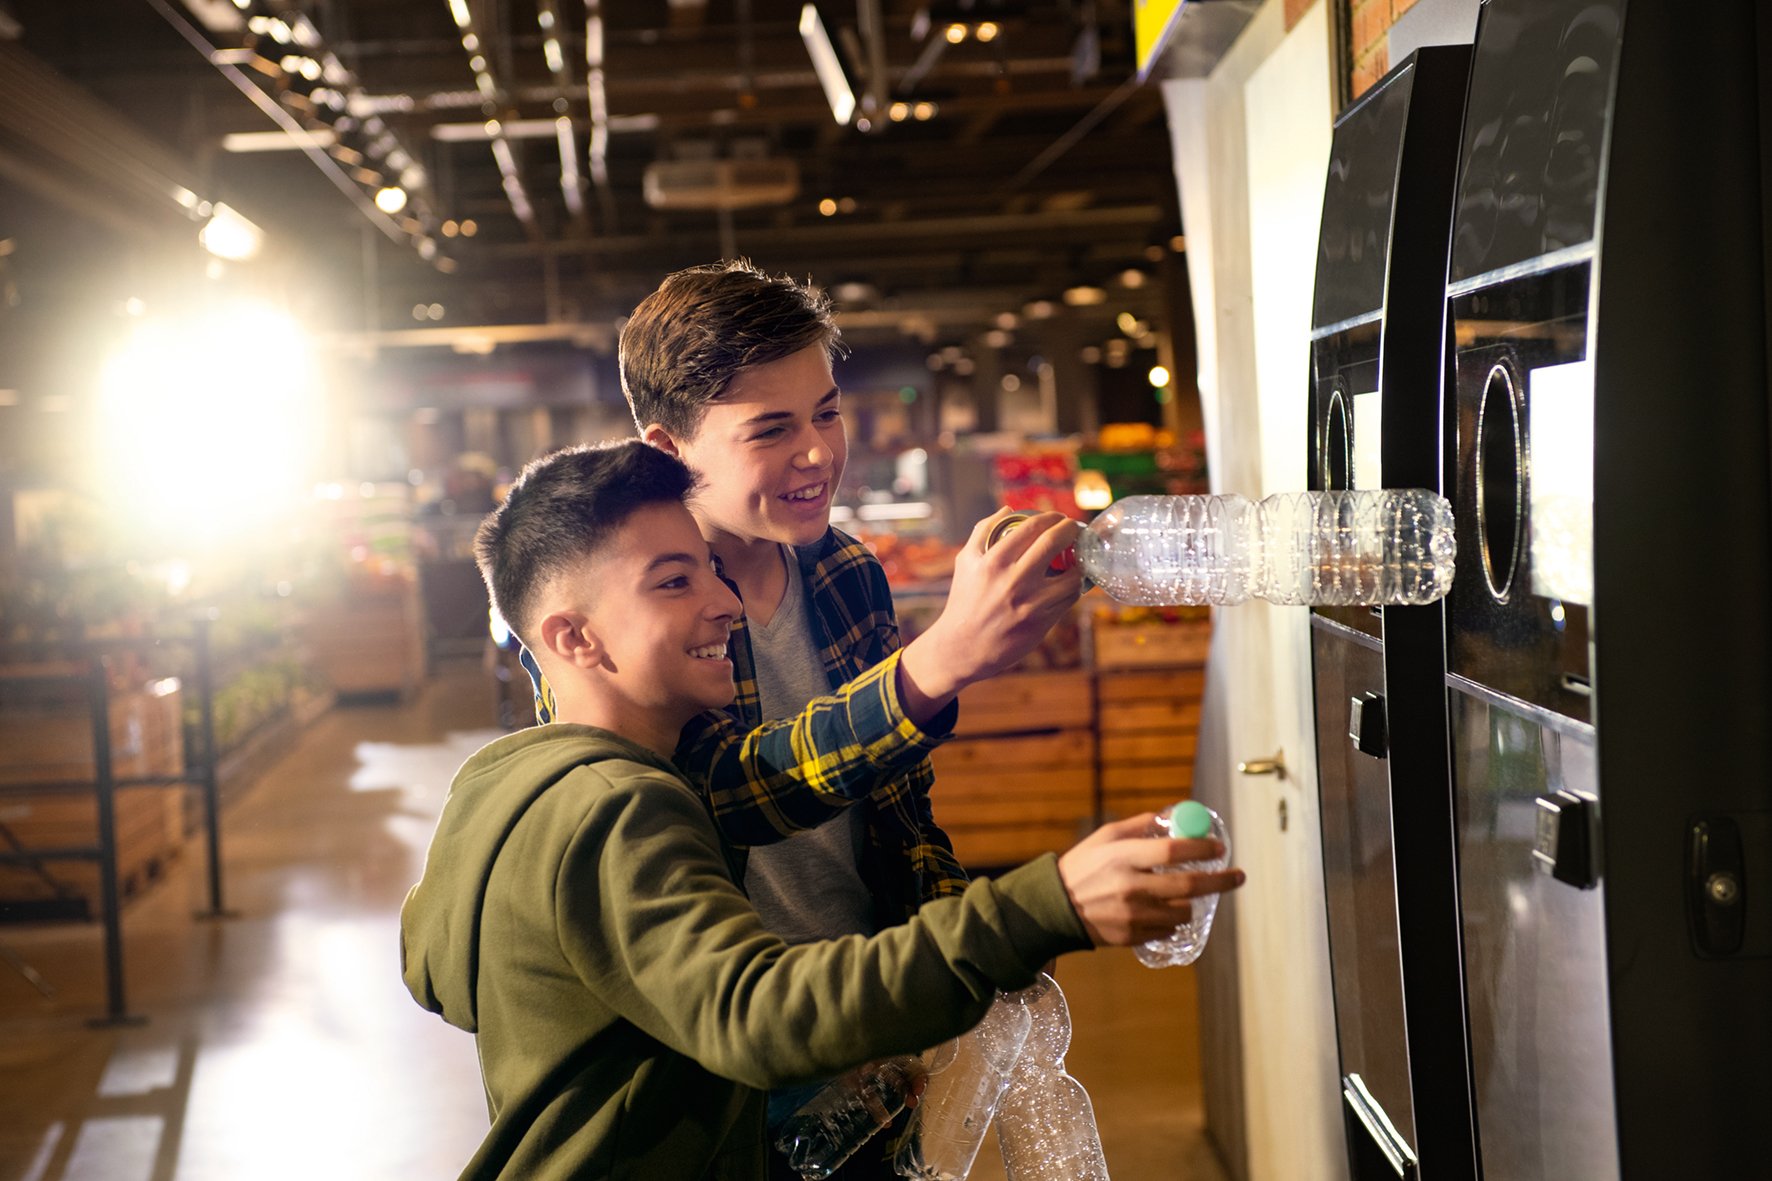 image of kids with reverse vending machines